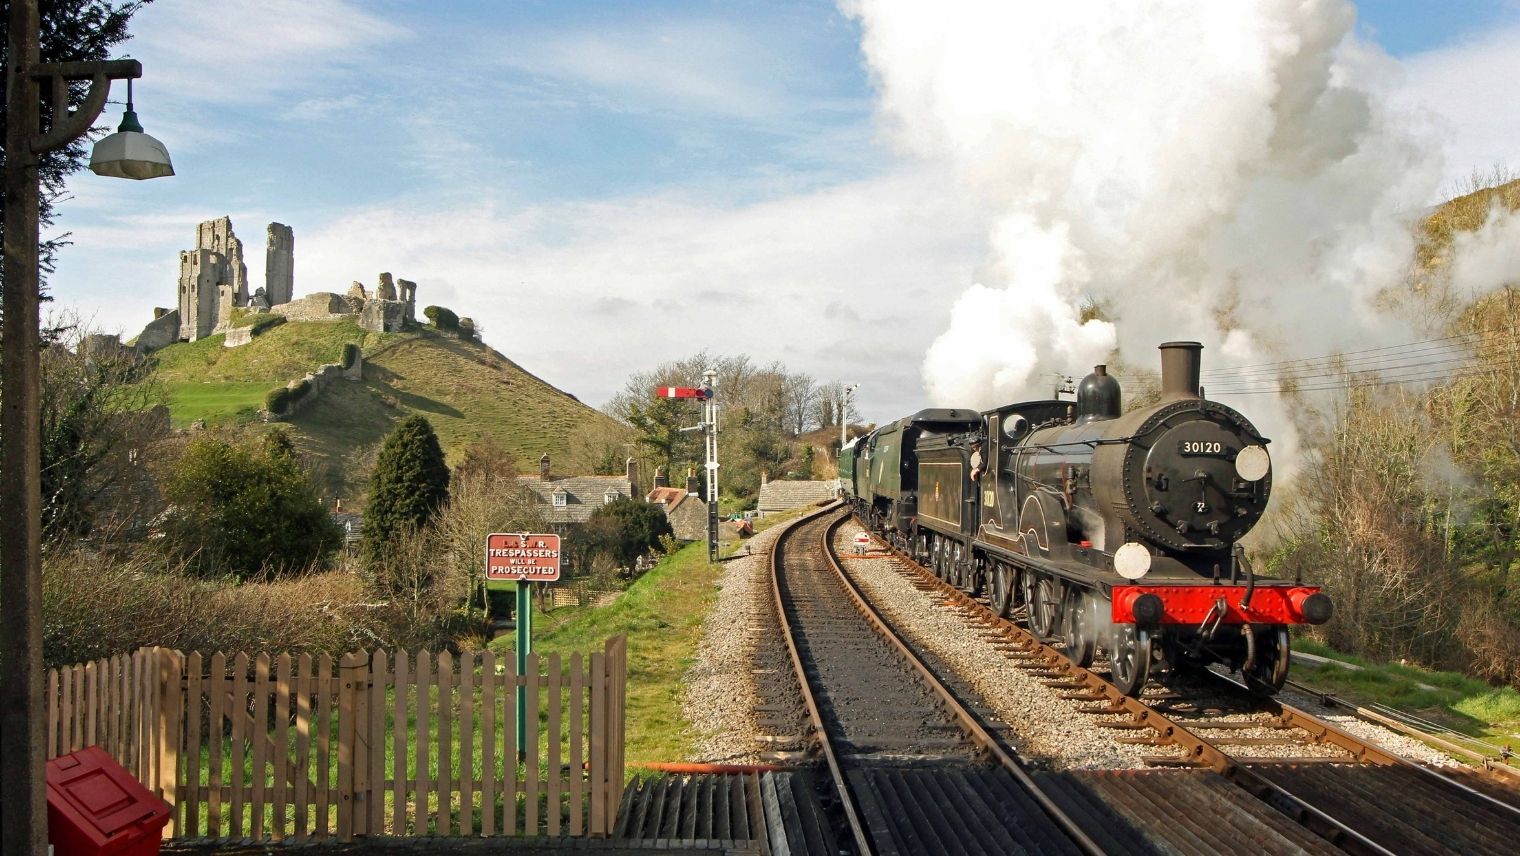 A steam train arriving at Corfe Castle station